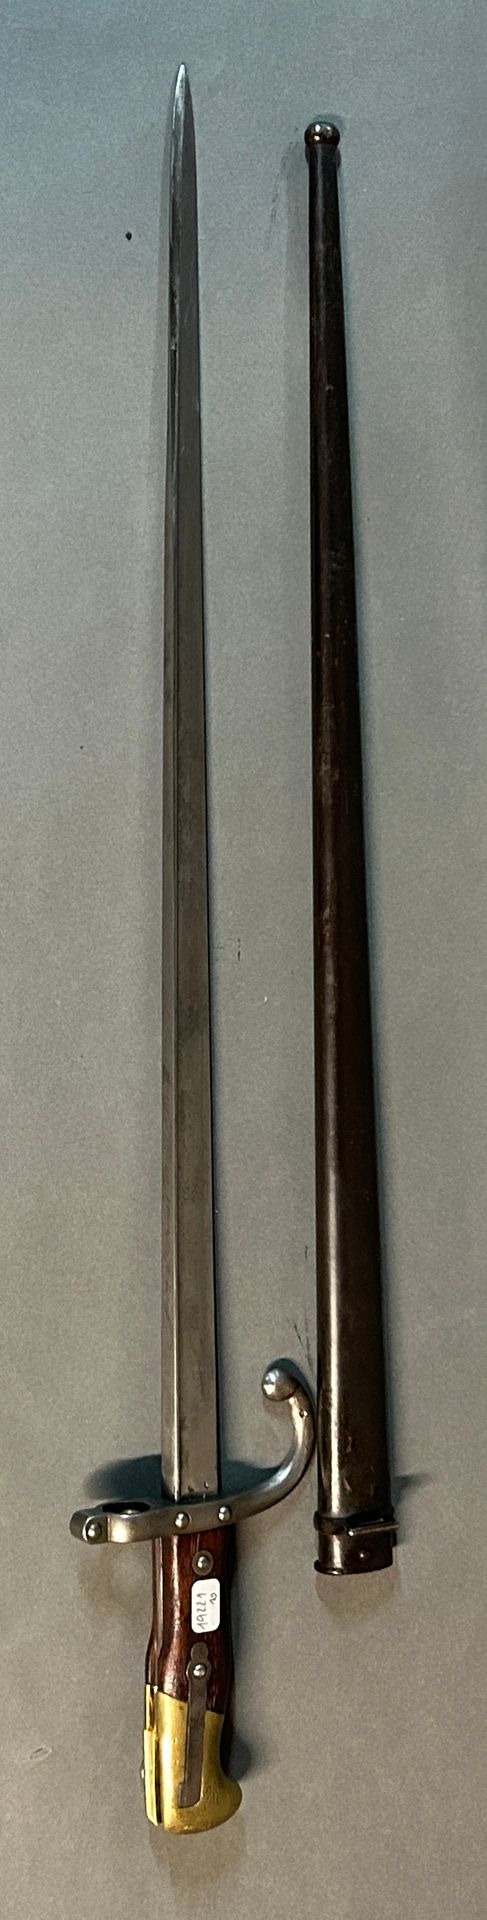 Null Bayonet model 1874 said Gras.

Brass pommel, two riveted wooden plates, cur&hellip;